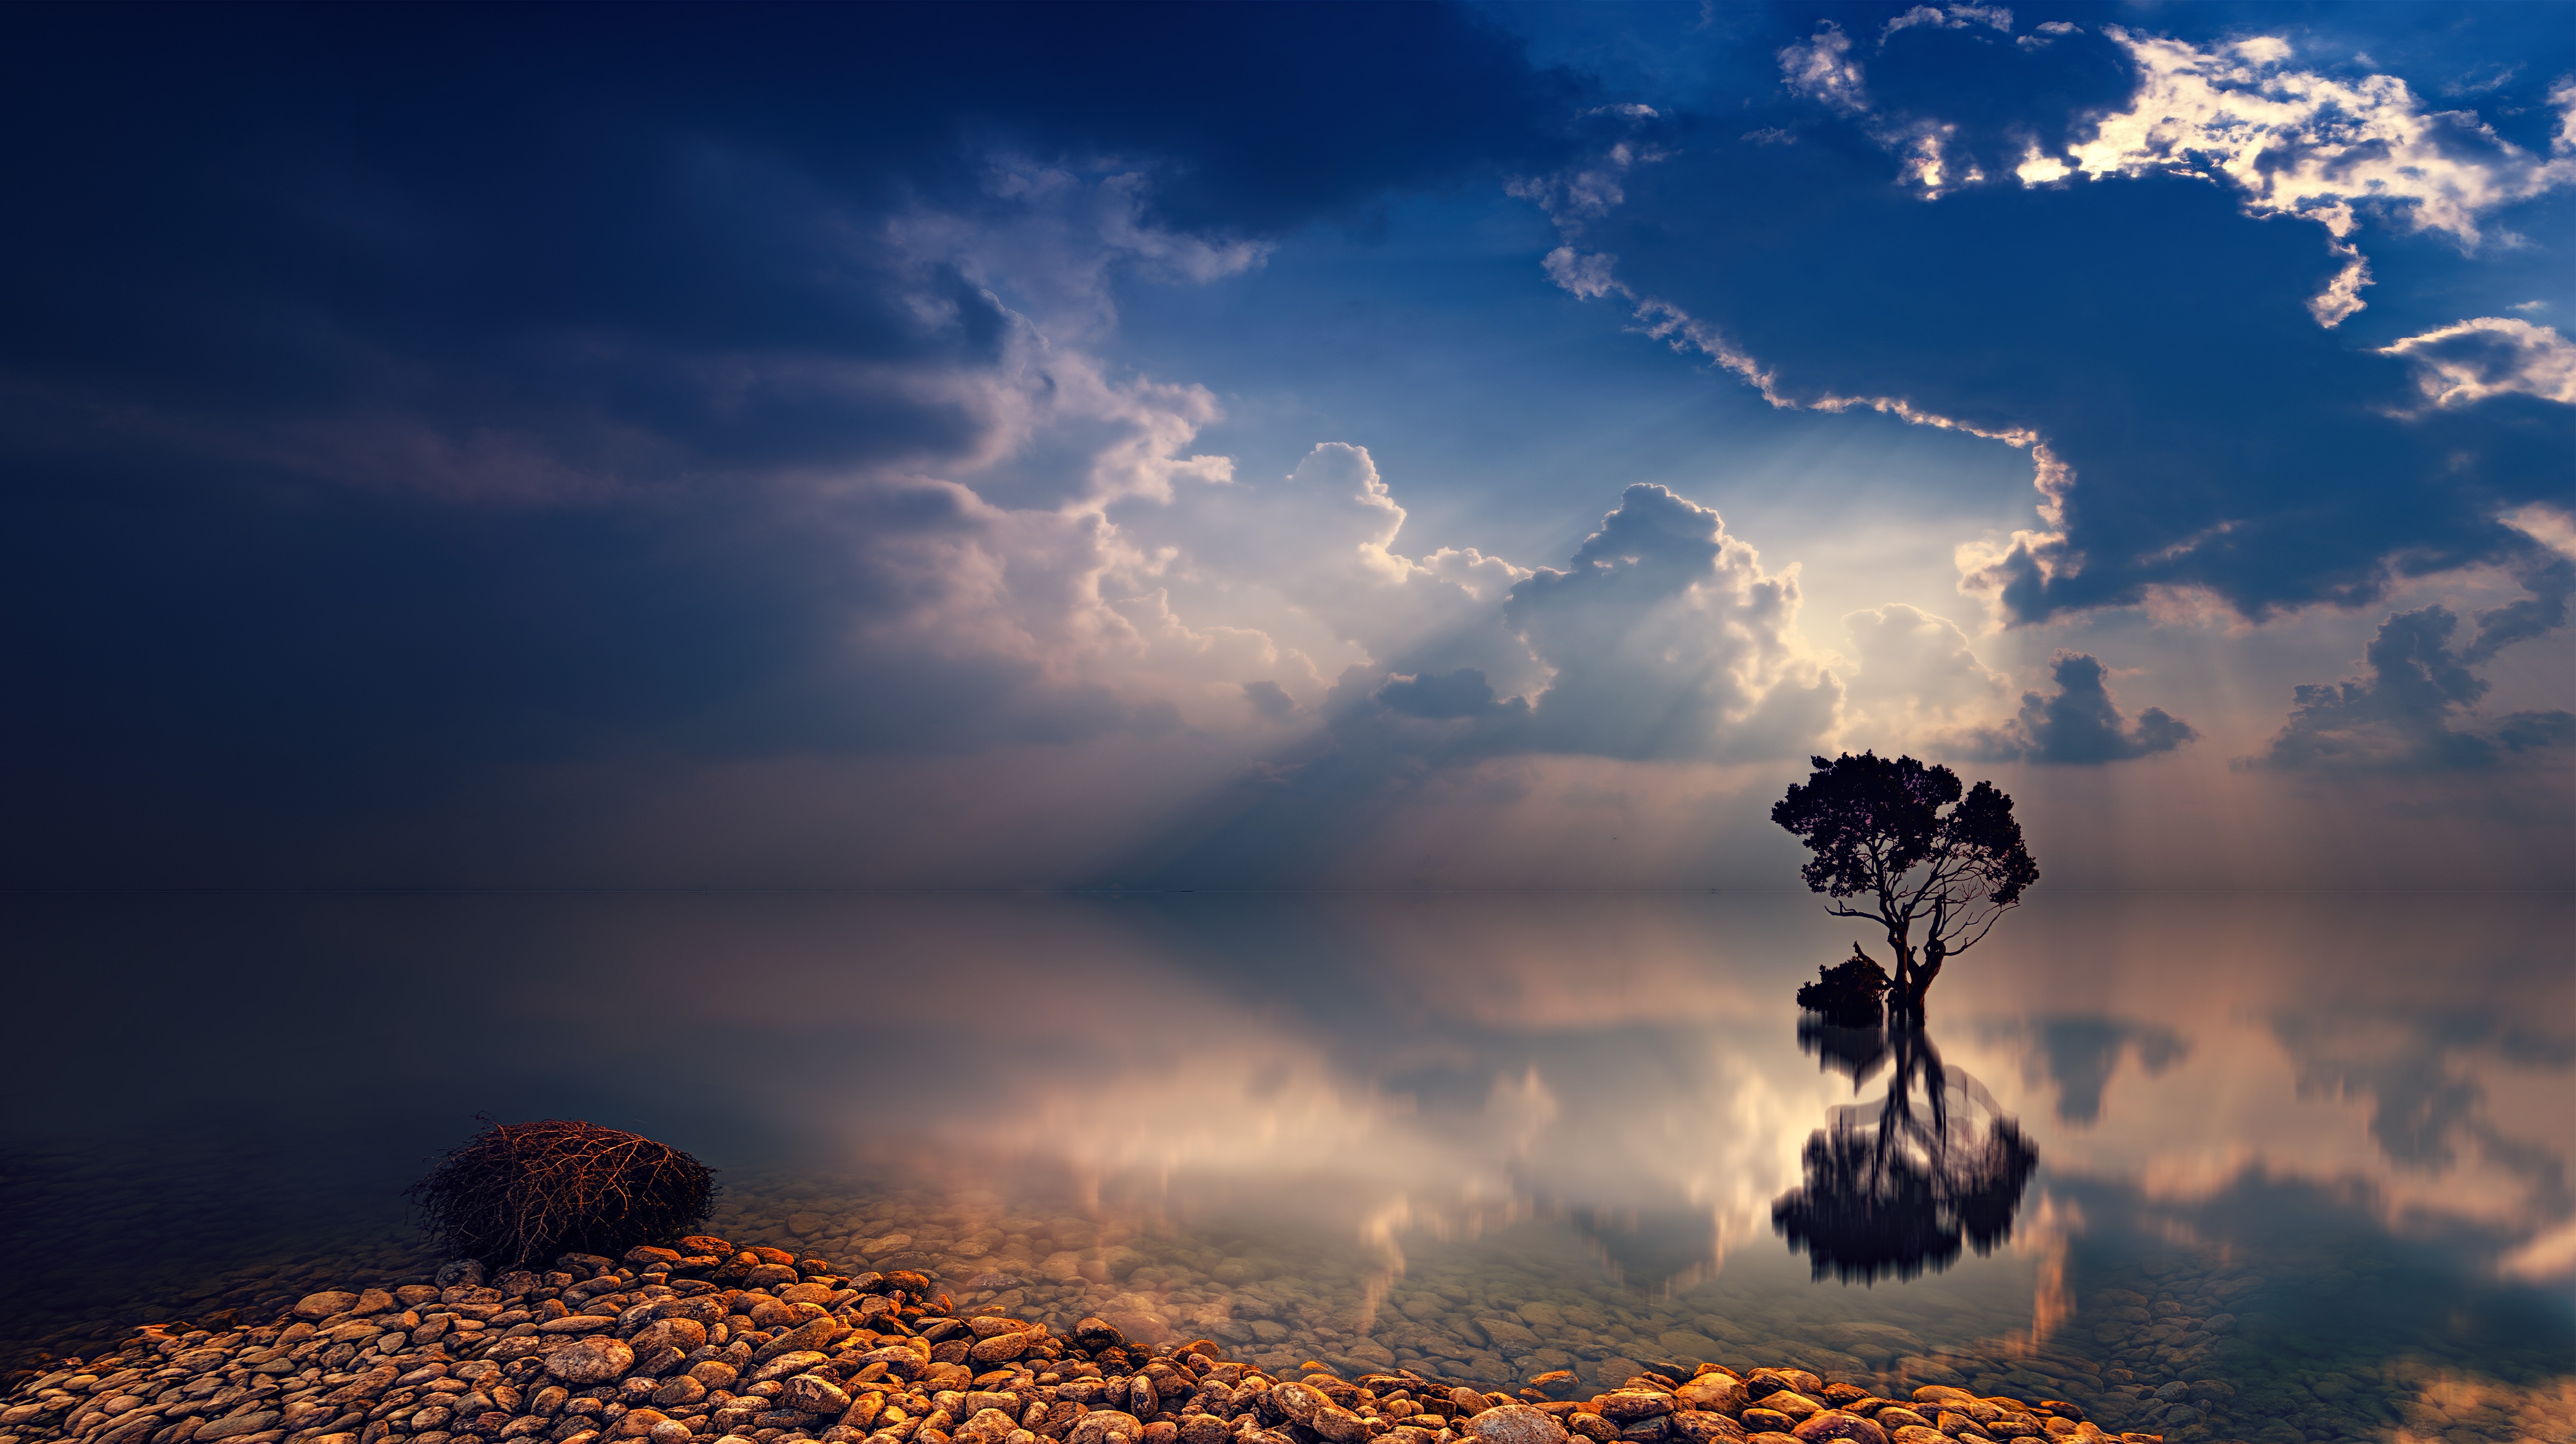 Hd 1080p Images earth, reflection, lonely tree, trees